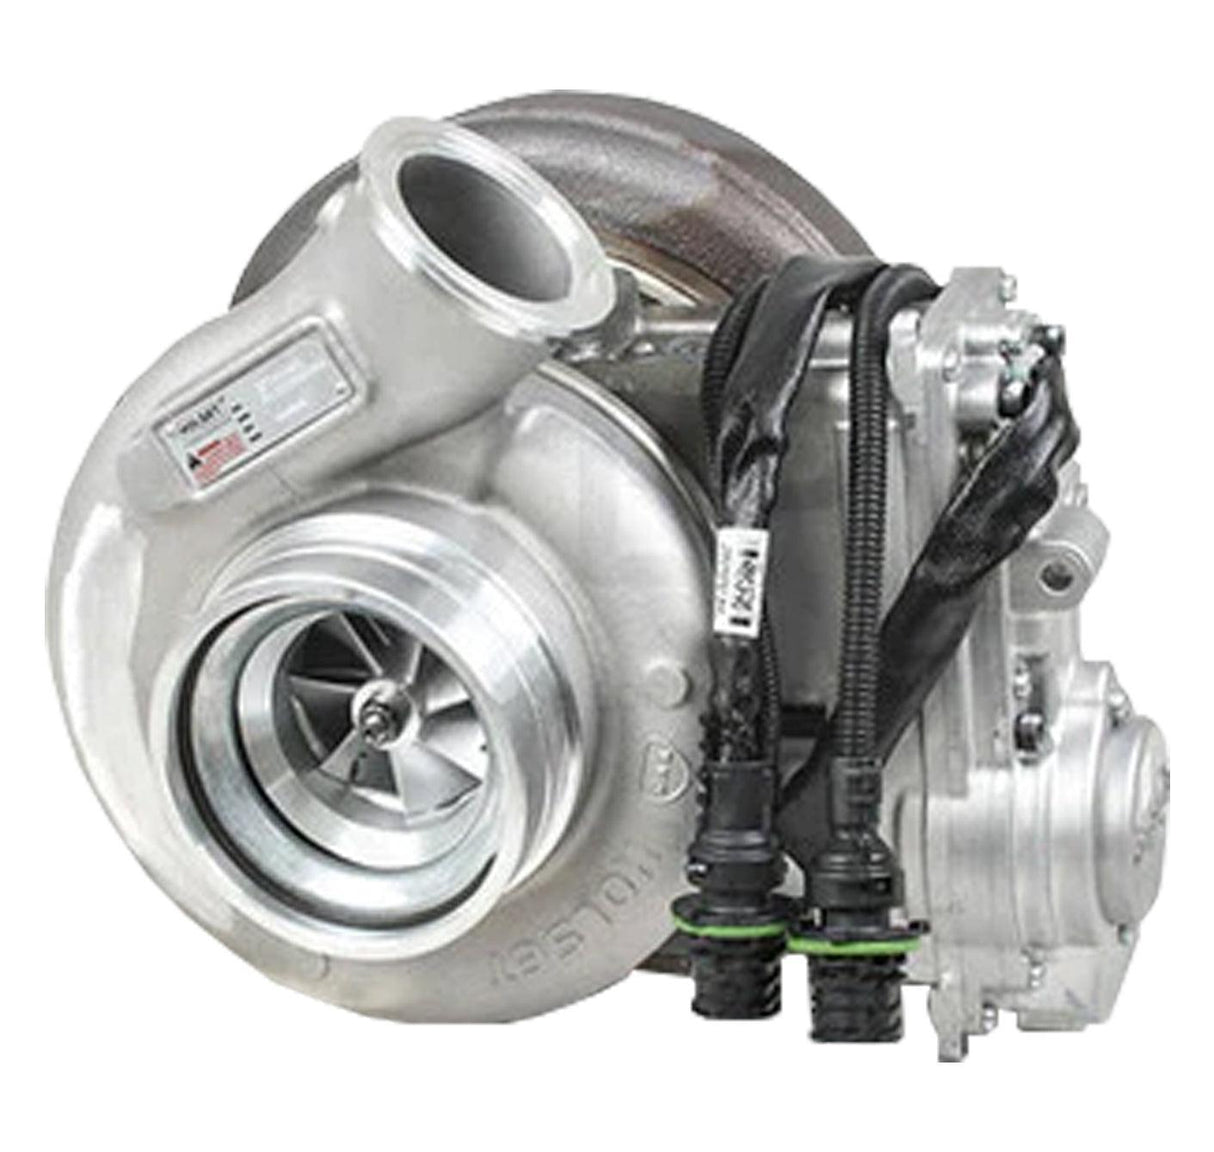 21647087 Oem Genuine Volvo® Holset® Turbocharger With Actuator For Md11